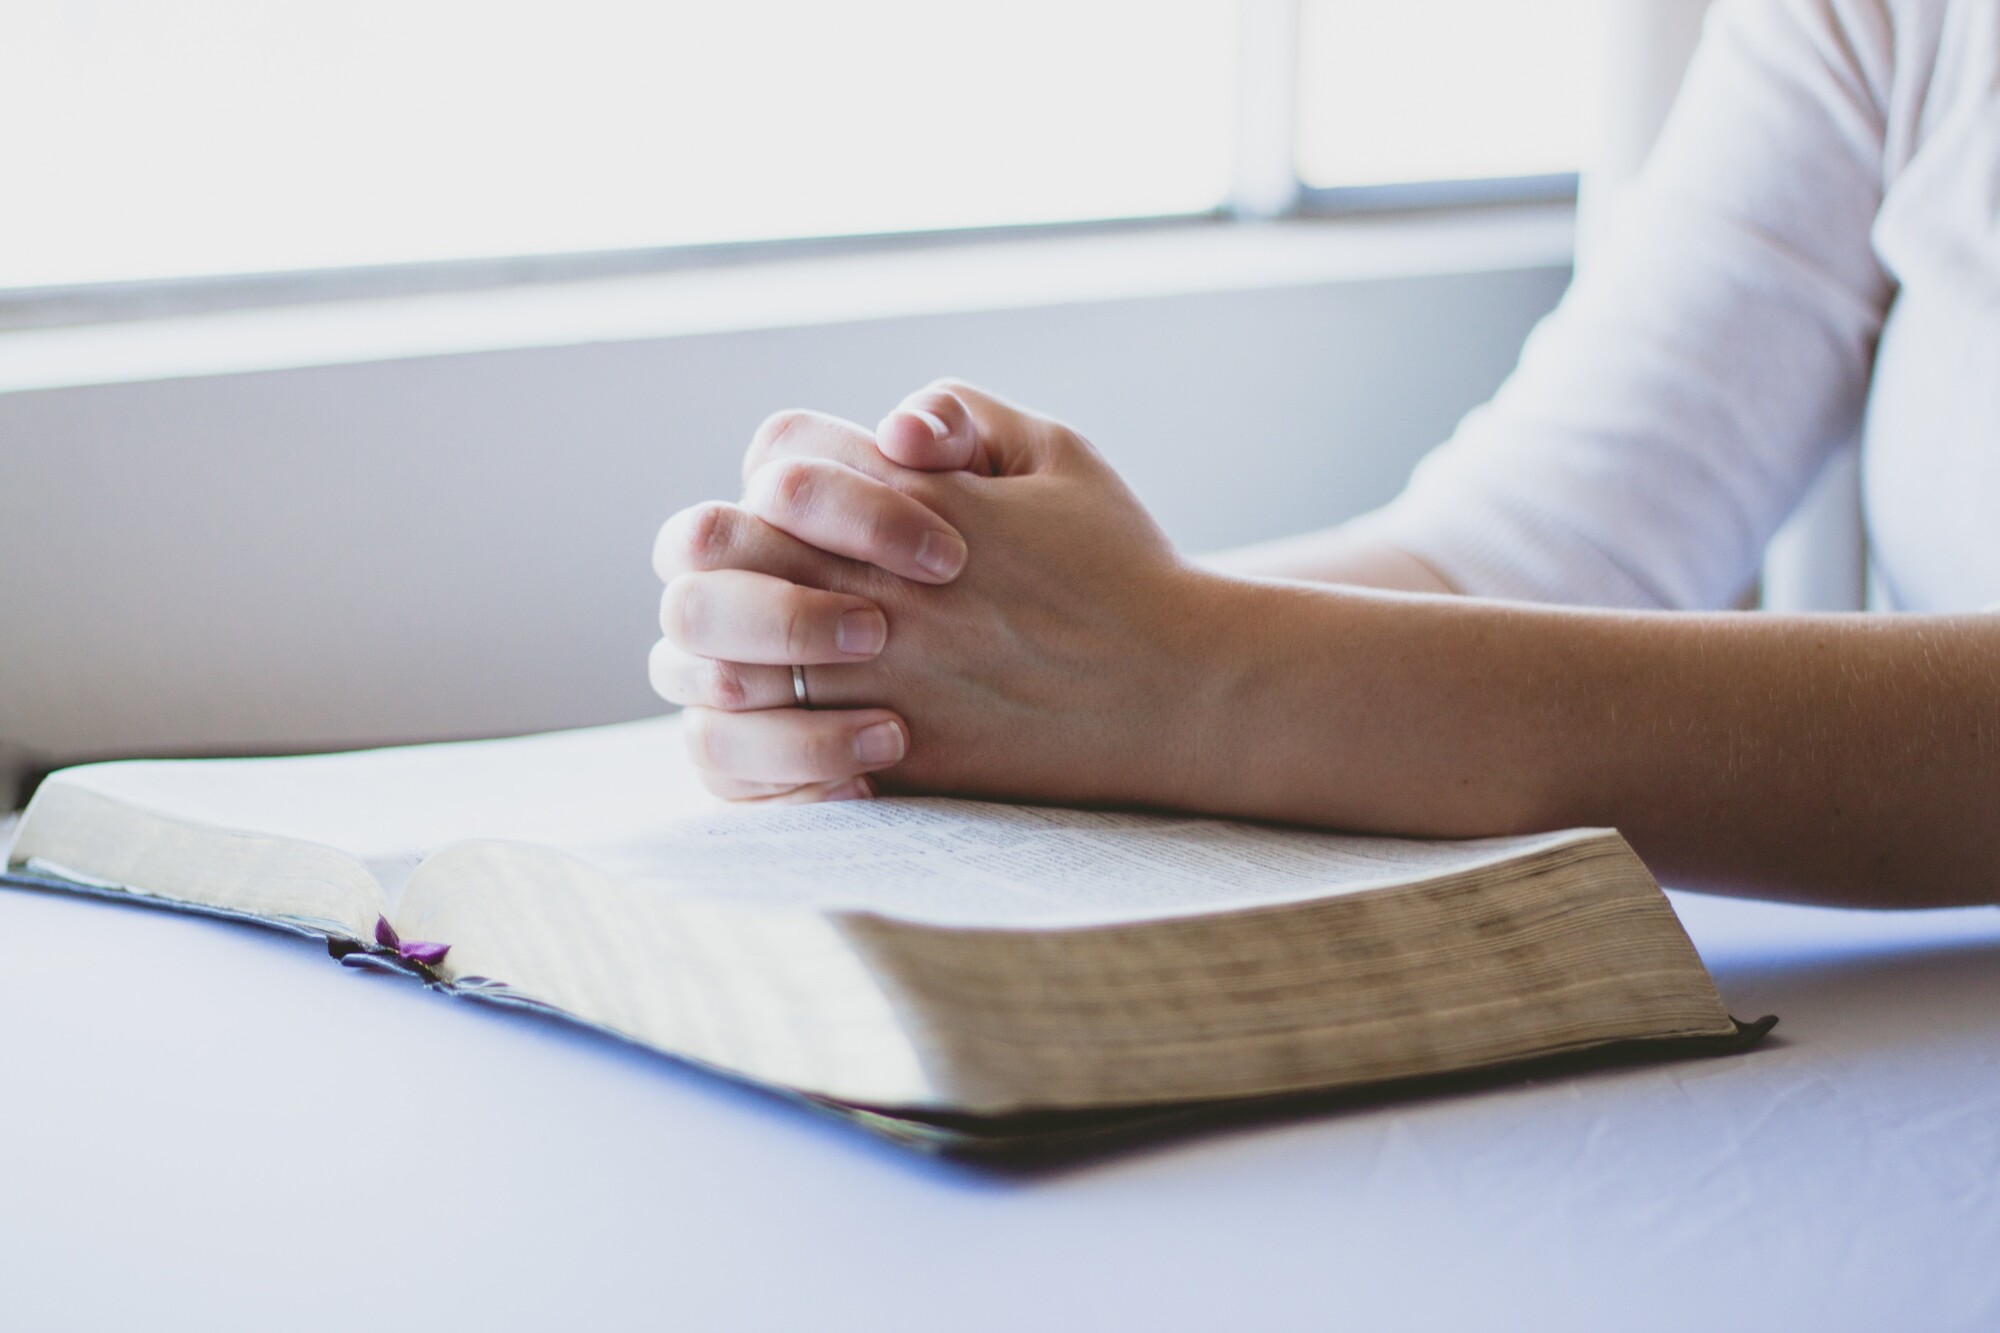 There are many things we can learn from the Bible that are relevant today. If you're in need of some inspiration, here's some life Bible lessons.